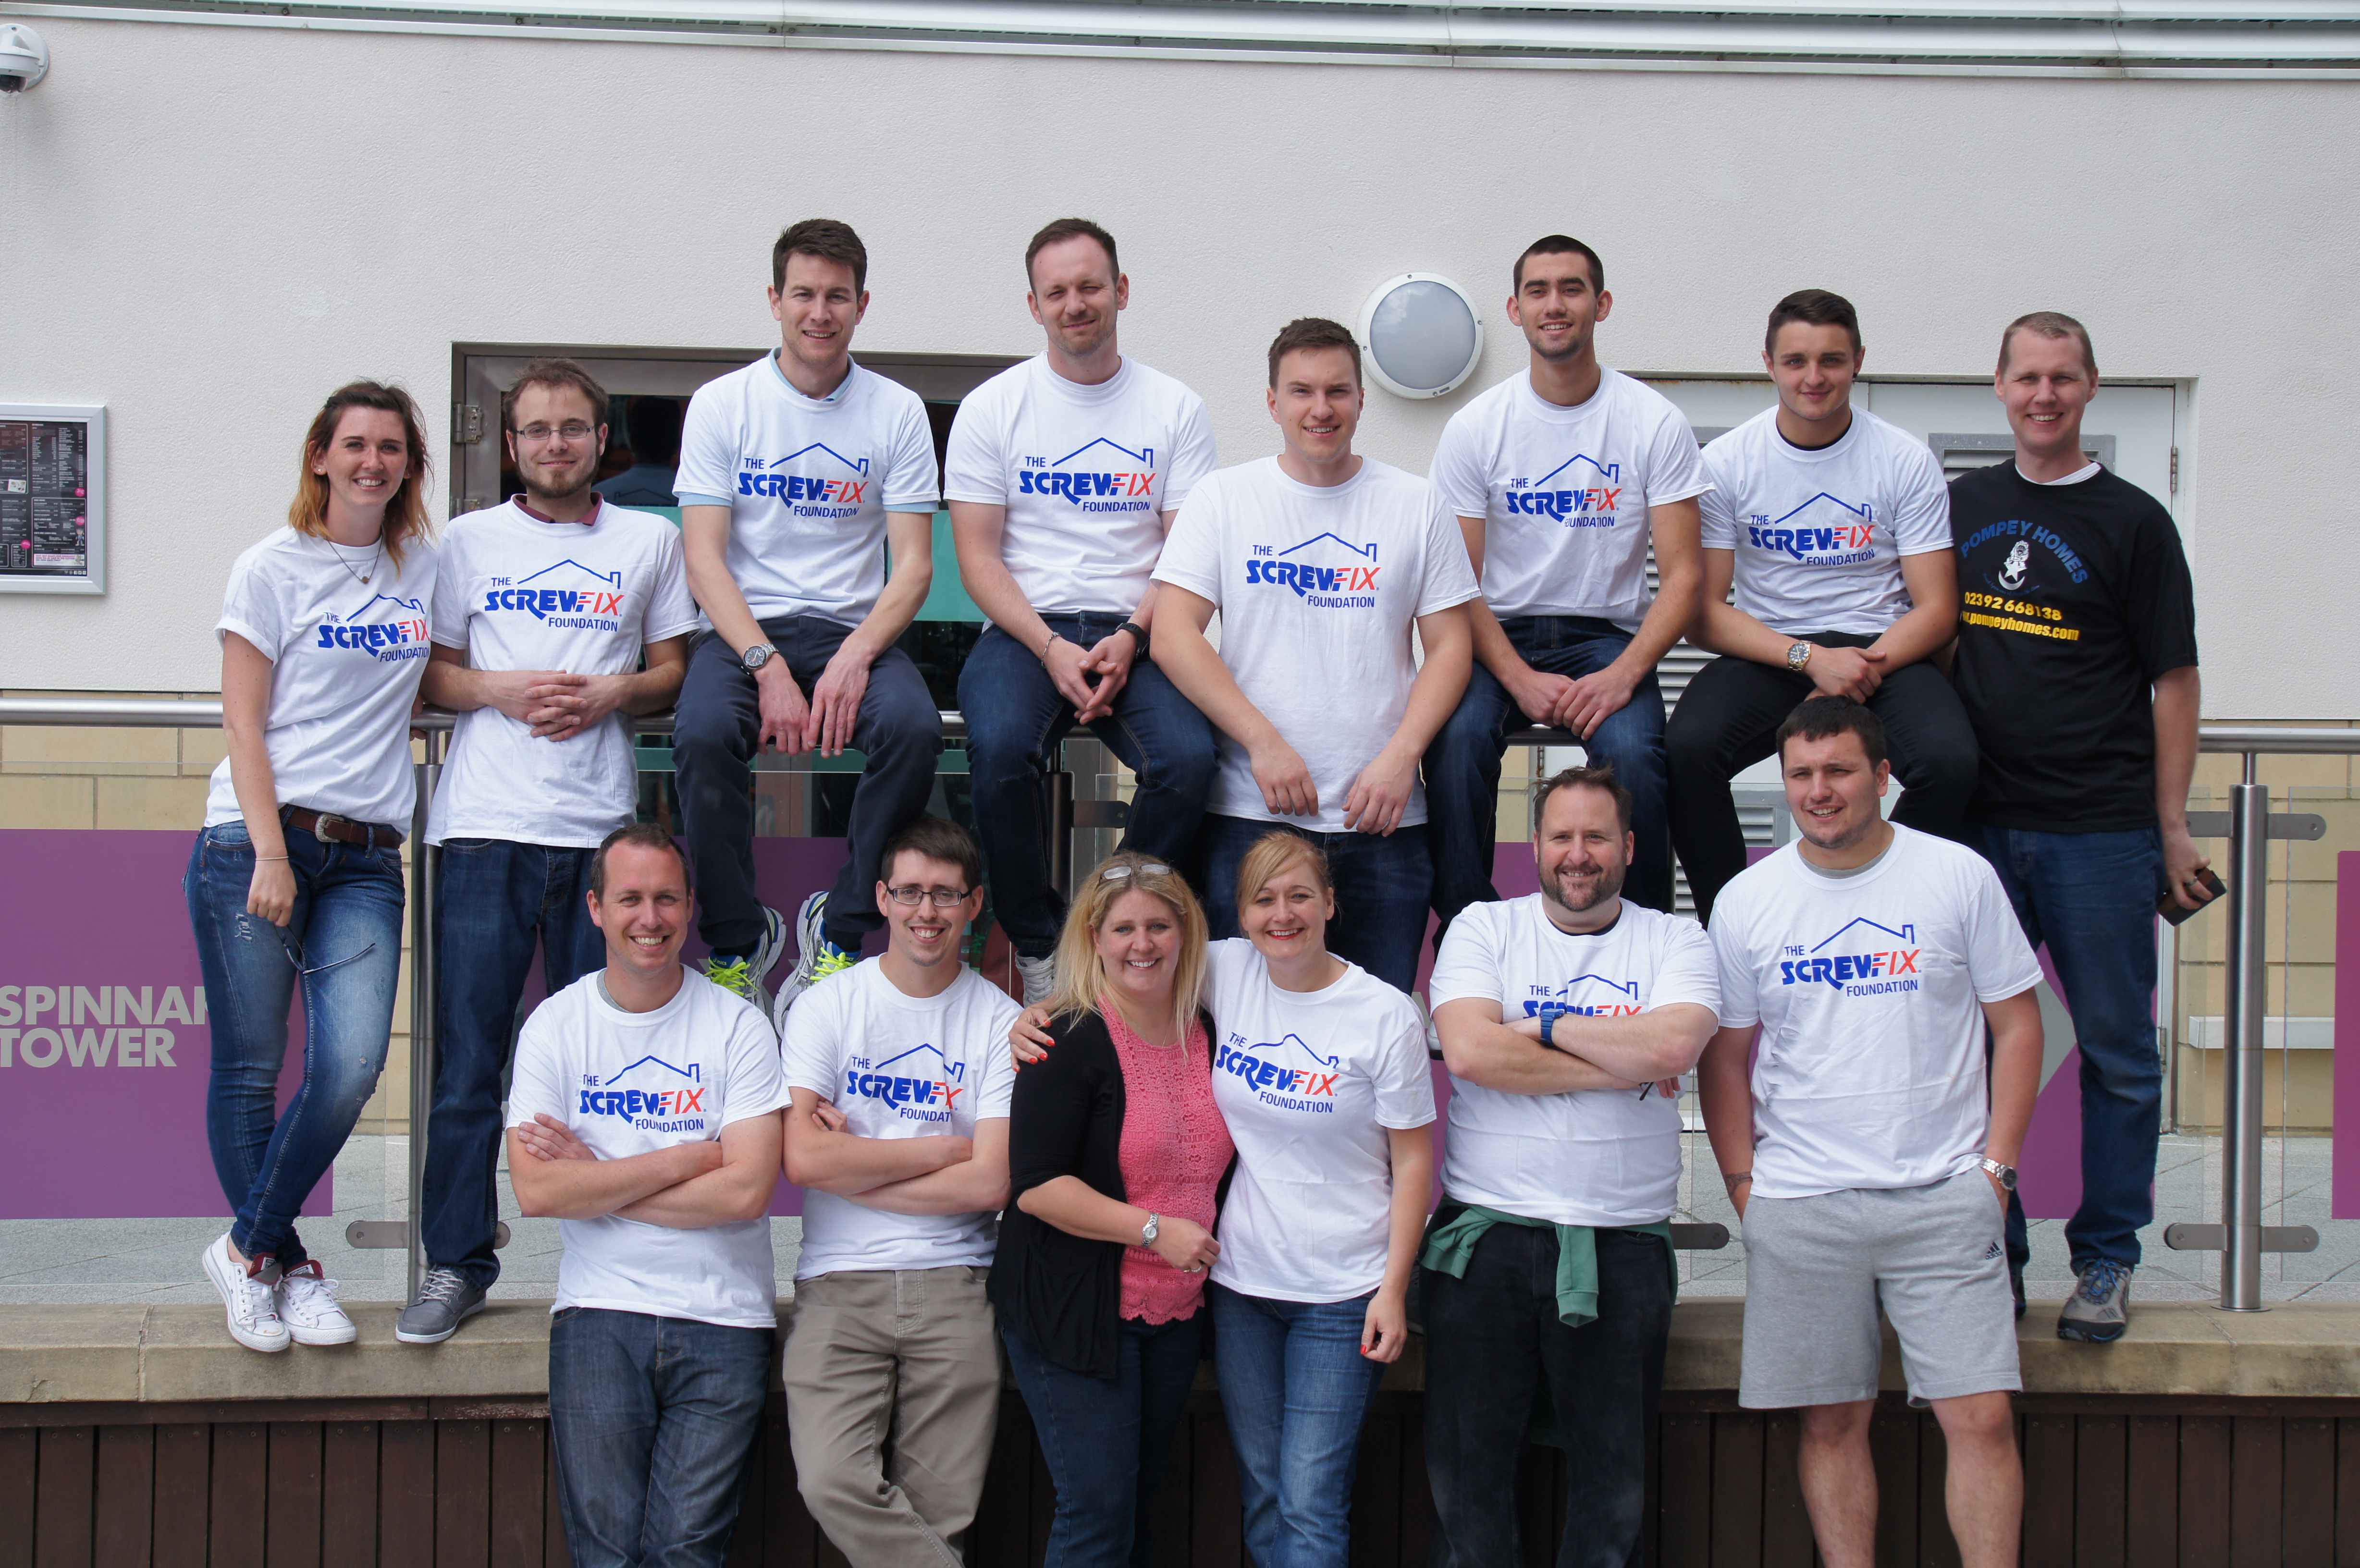 Screwfix employees’ abseil down the Spinnaker Tower for charity